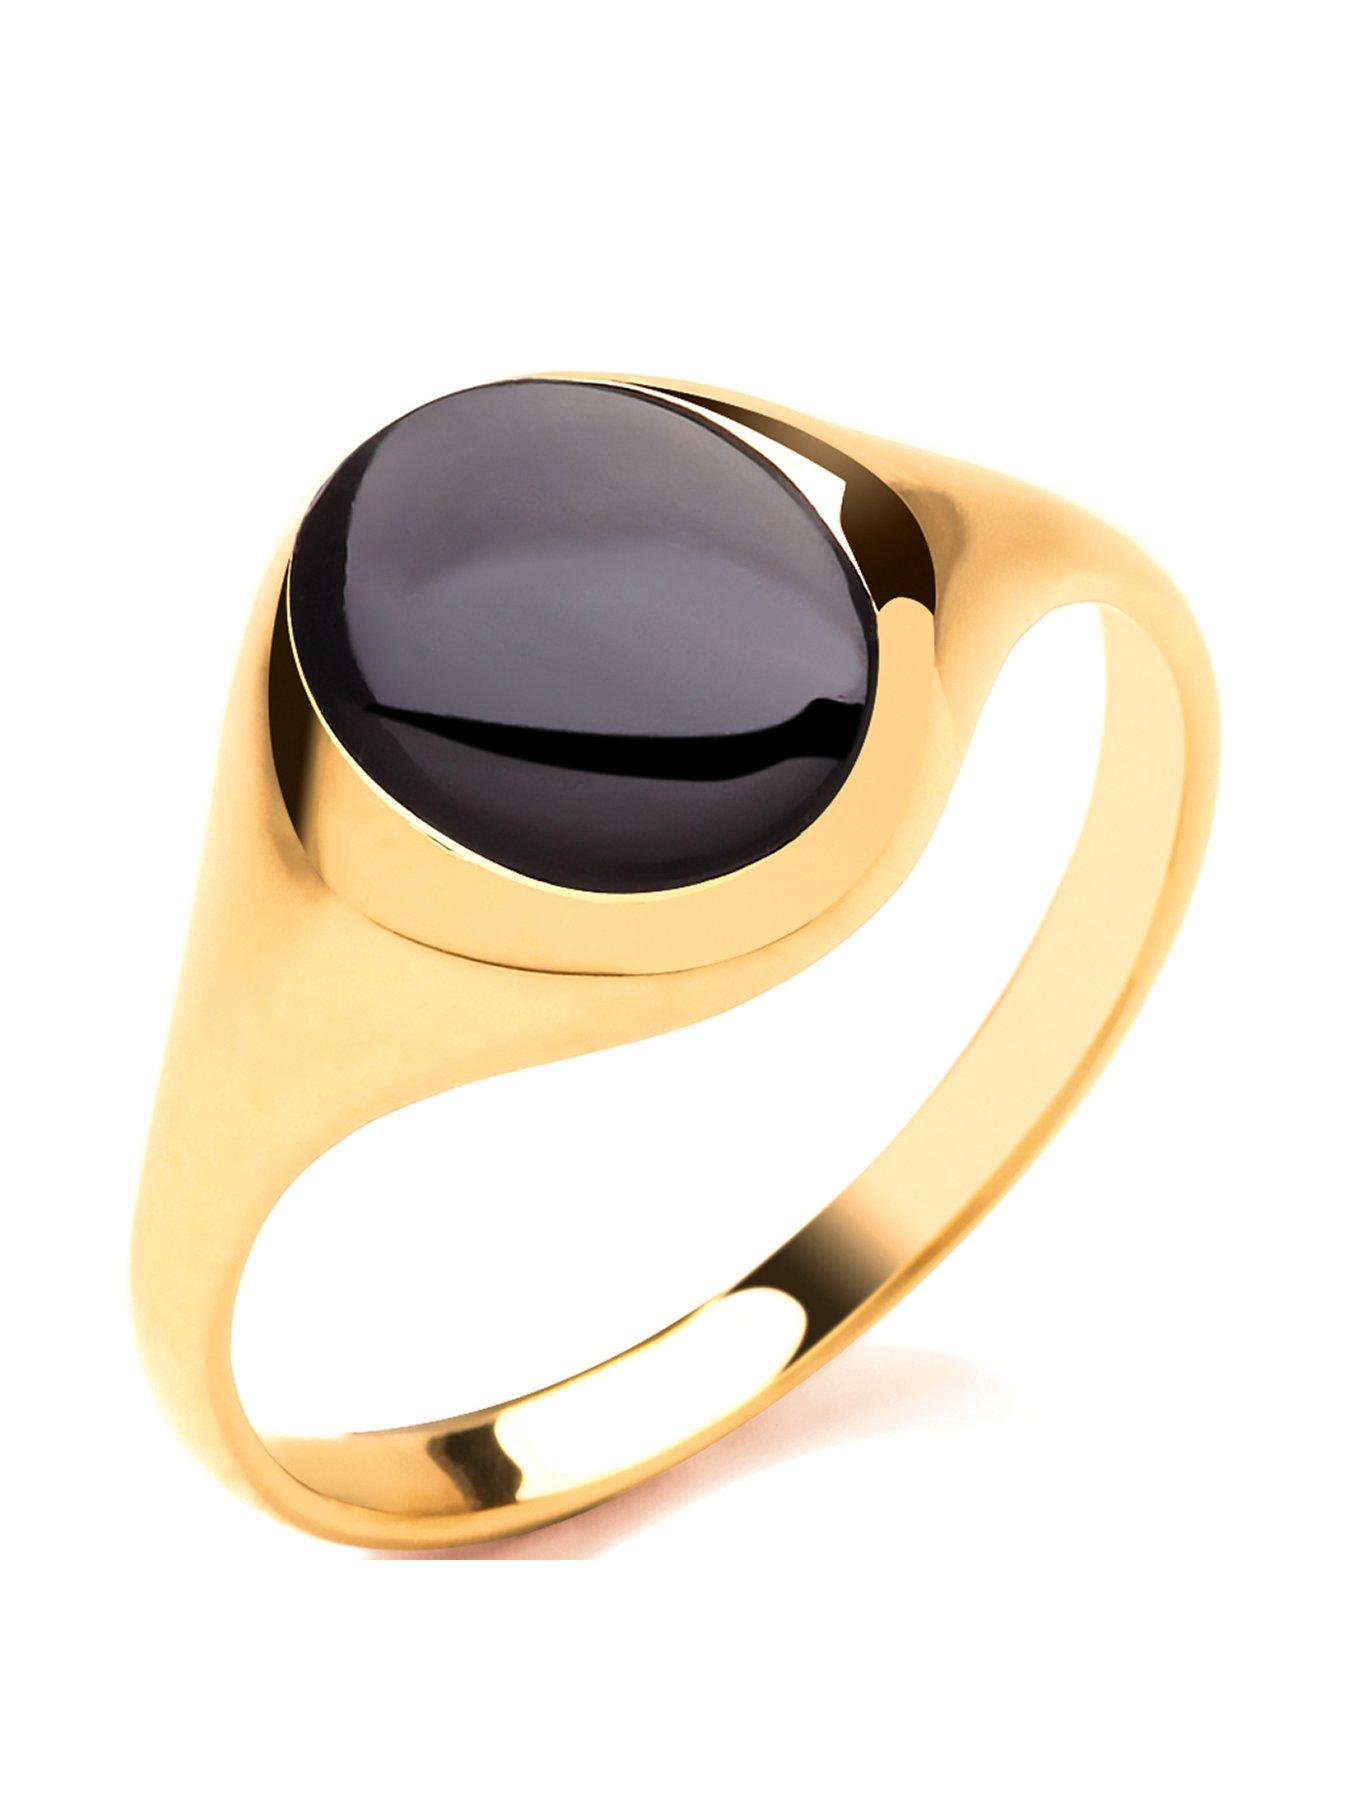 Men's rings with stones | 72 Styles for men in stock